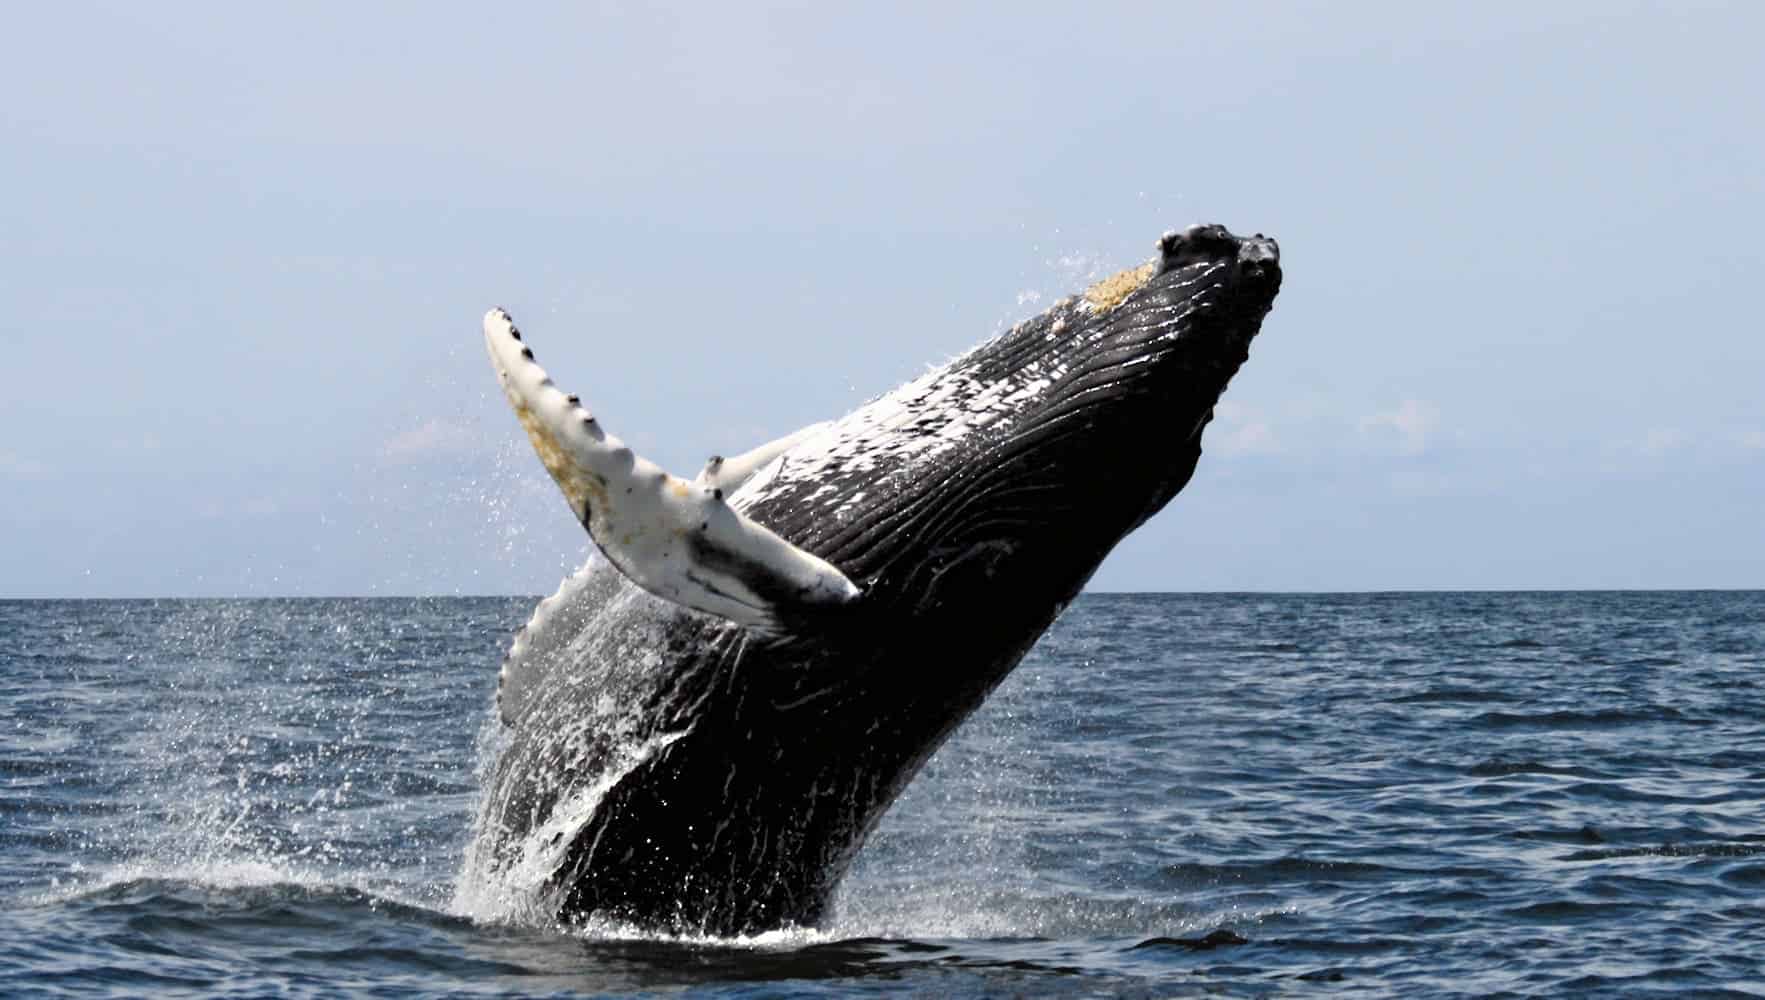 Humpbacks frequently breach, throwing two-thirds or more of their bodies out of the water and splashing down on their backs. Photo by Wwelles14.